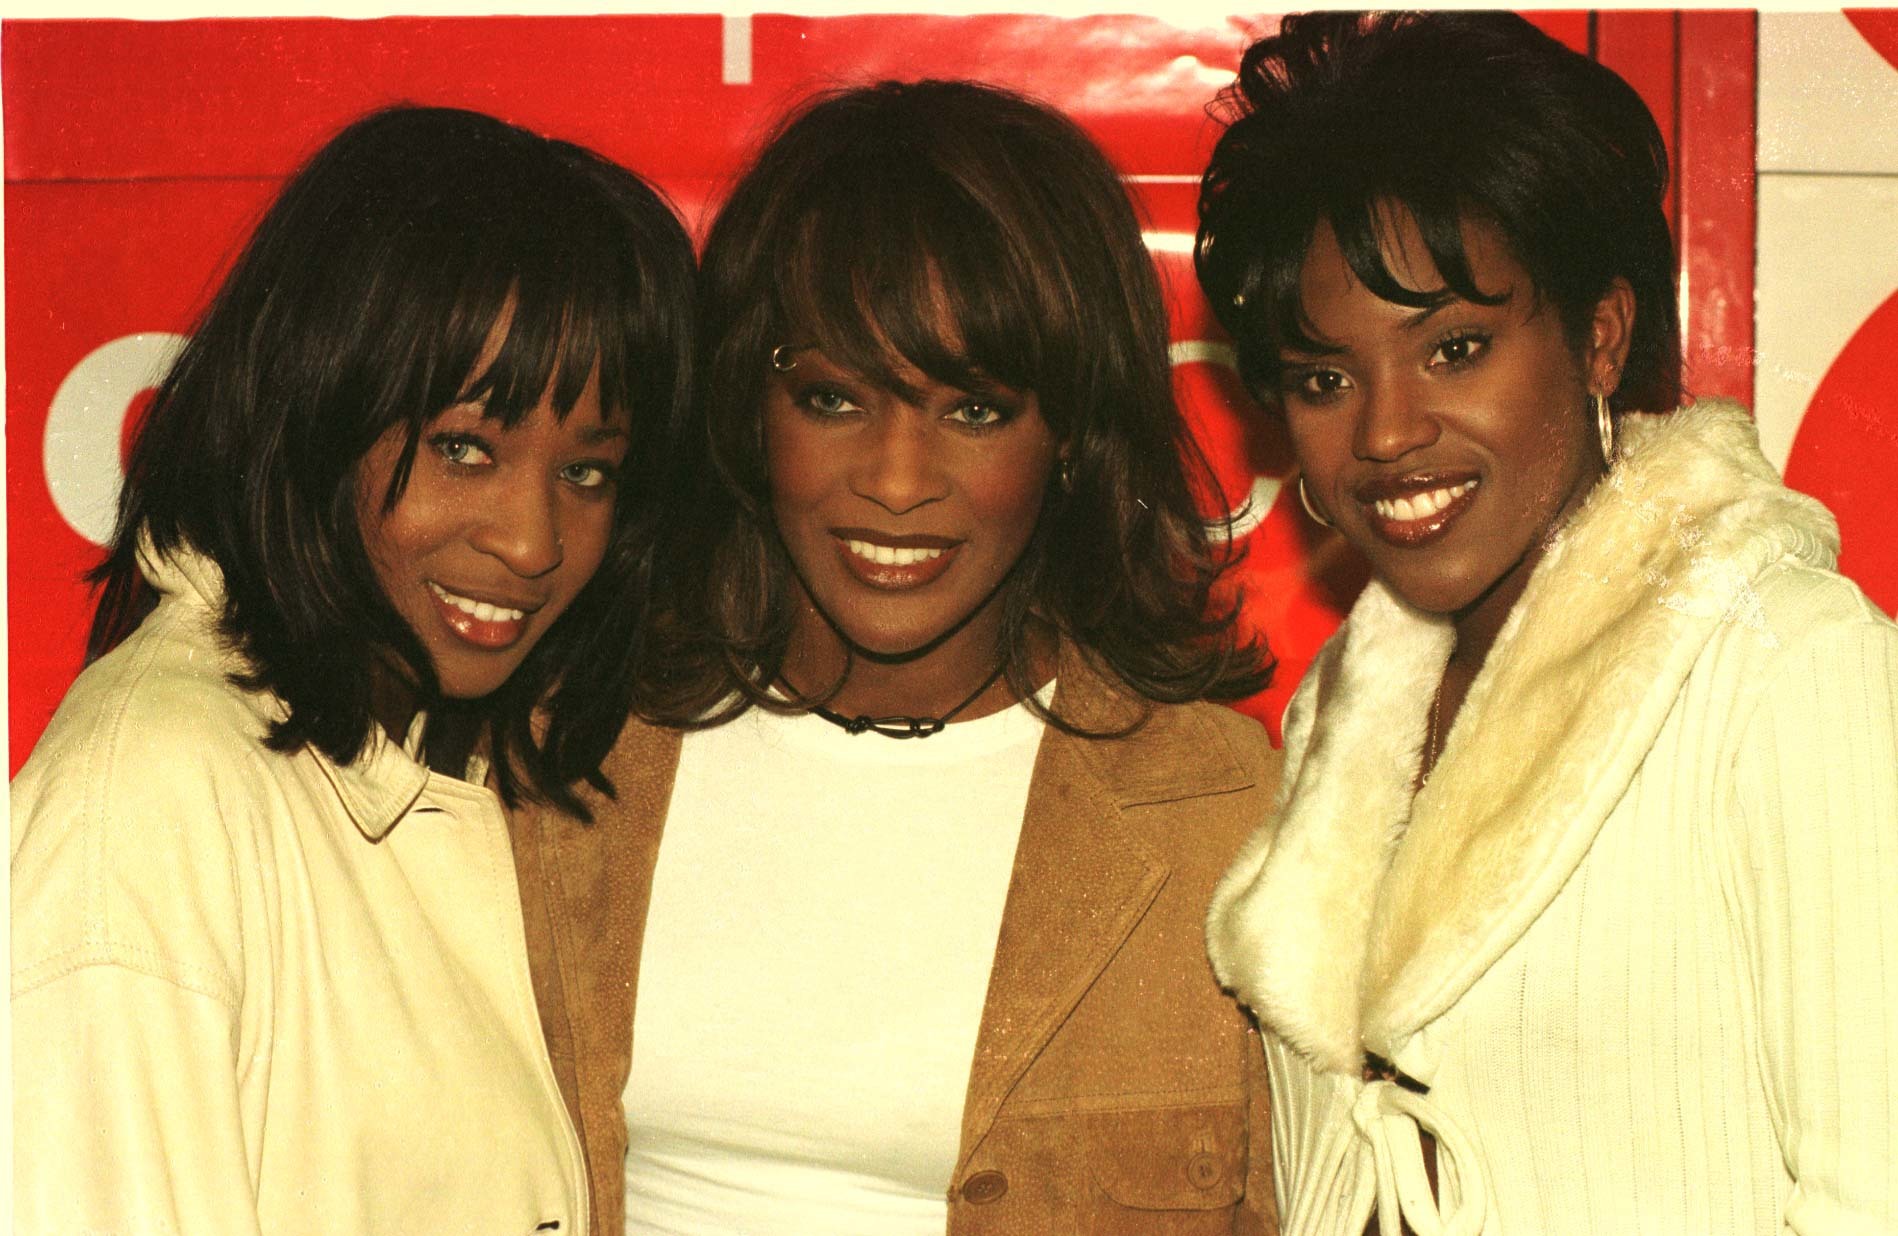 Sisters Easther Bennett and Vernie Bennett (left and middle) with Eternal bandmate Kelle Bryan.